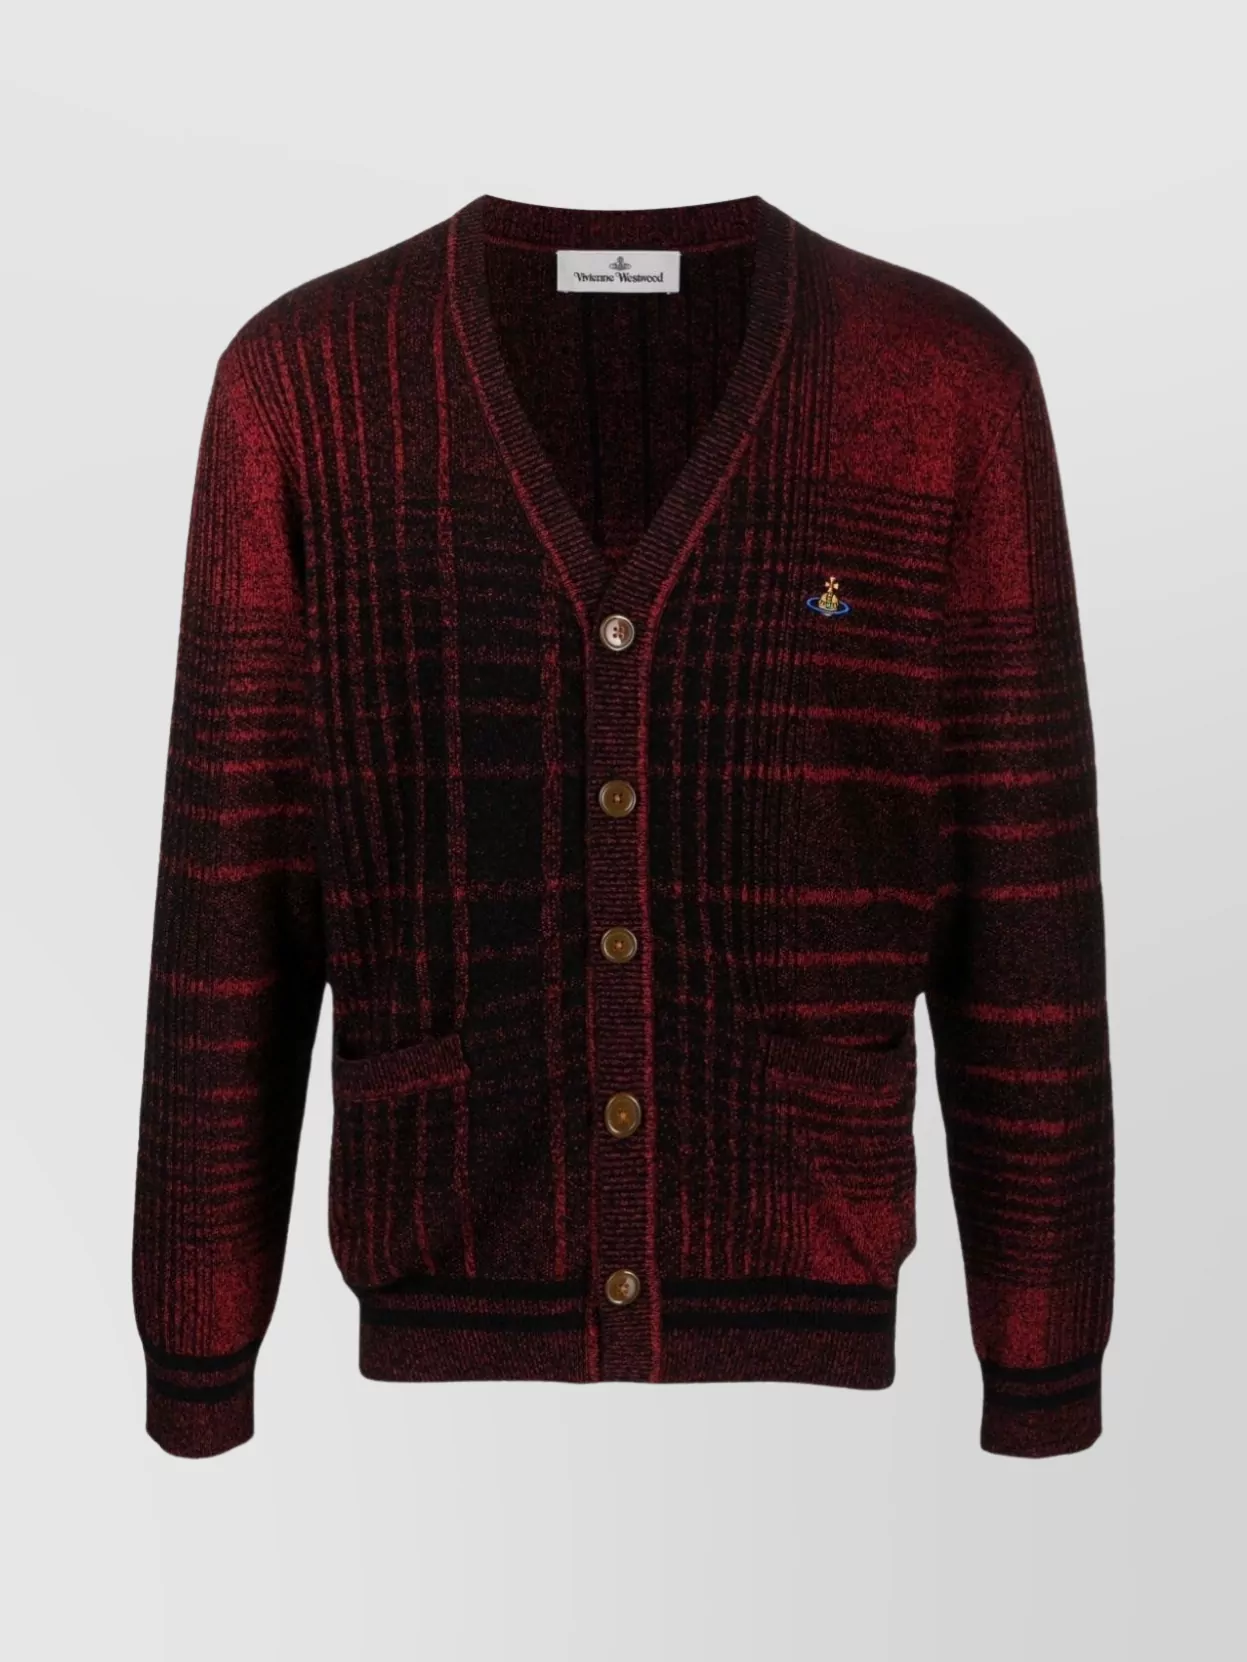 VIVIENNE WESTWOOD MADRAS RIBBED COTTON BLEND SWEATER